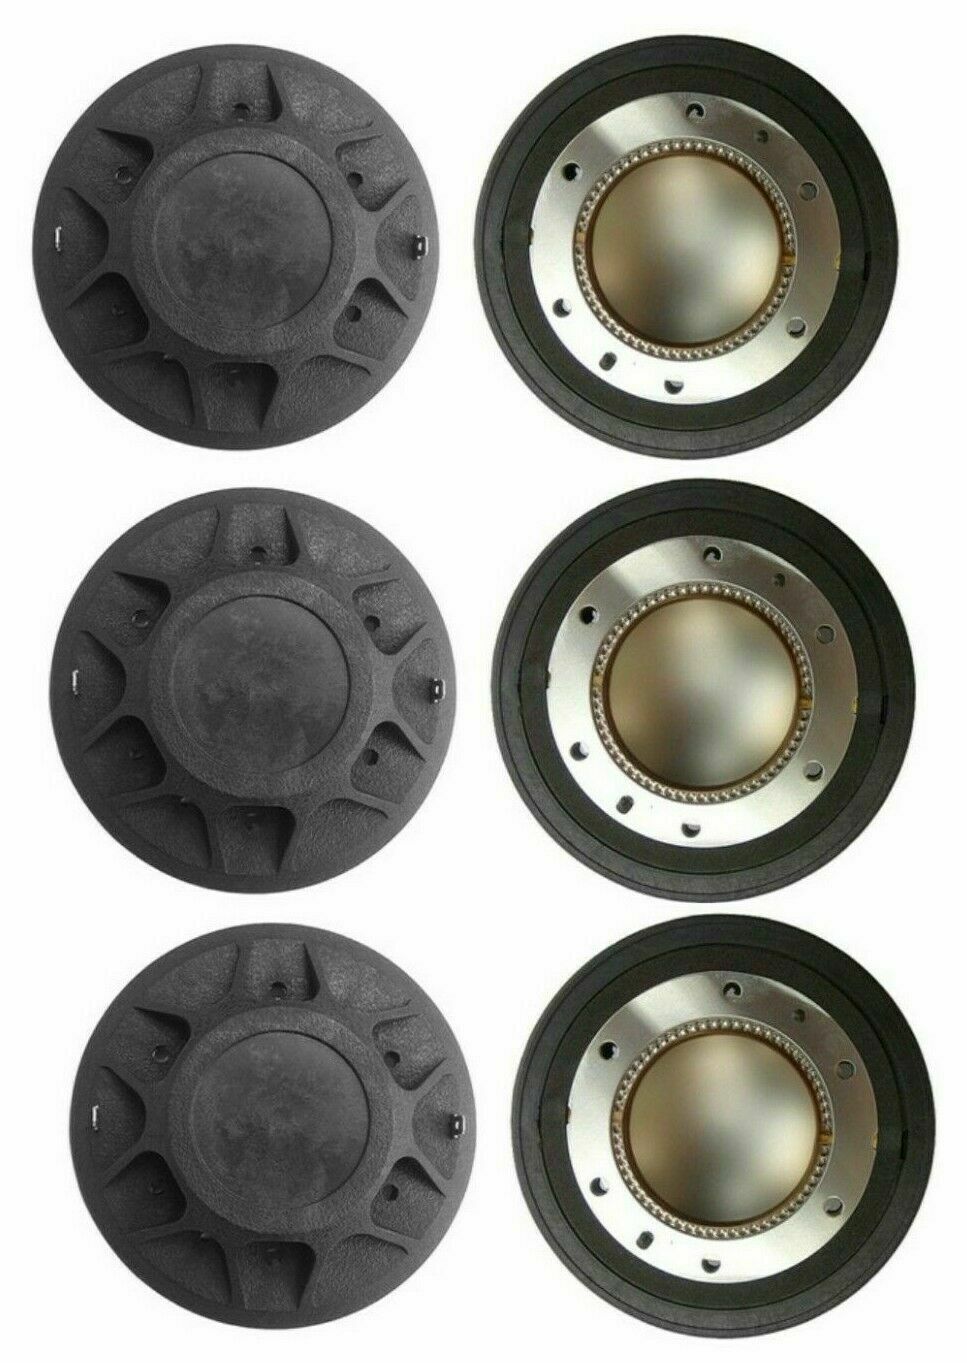 3 Replacement Diaphragm For Peavey 22XT, RX22, 22A, 22T, 2200 10-924